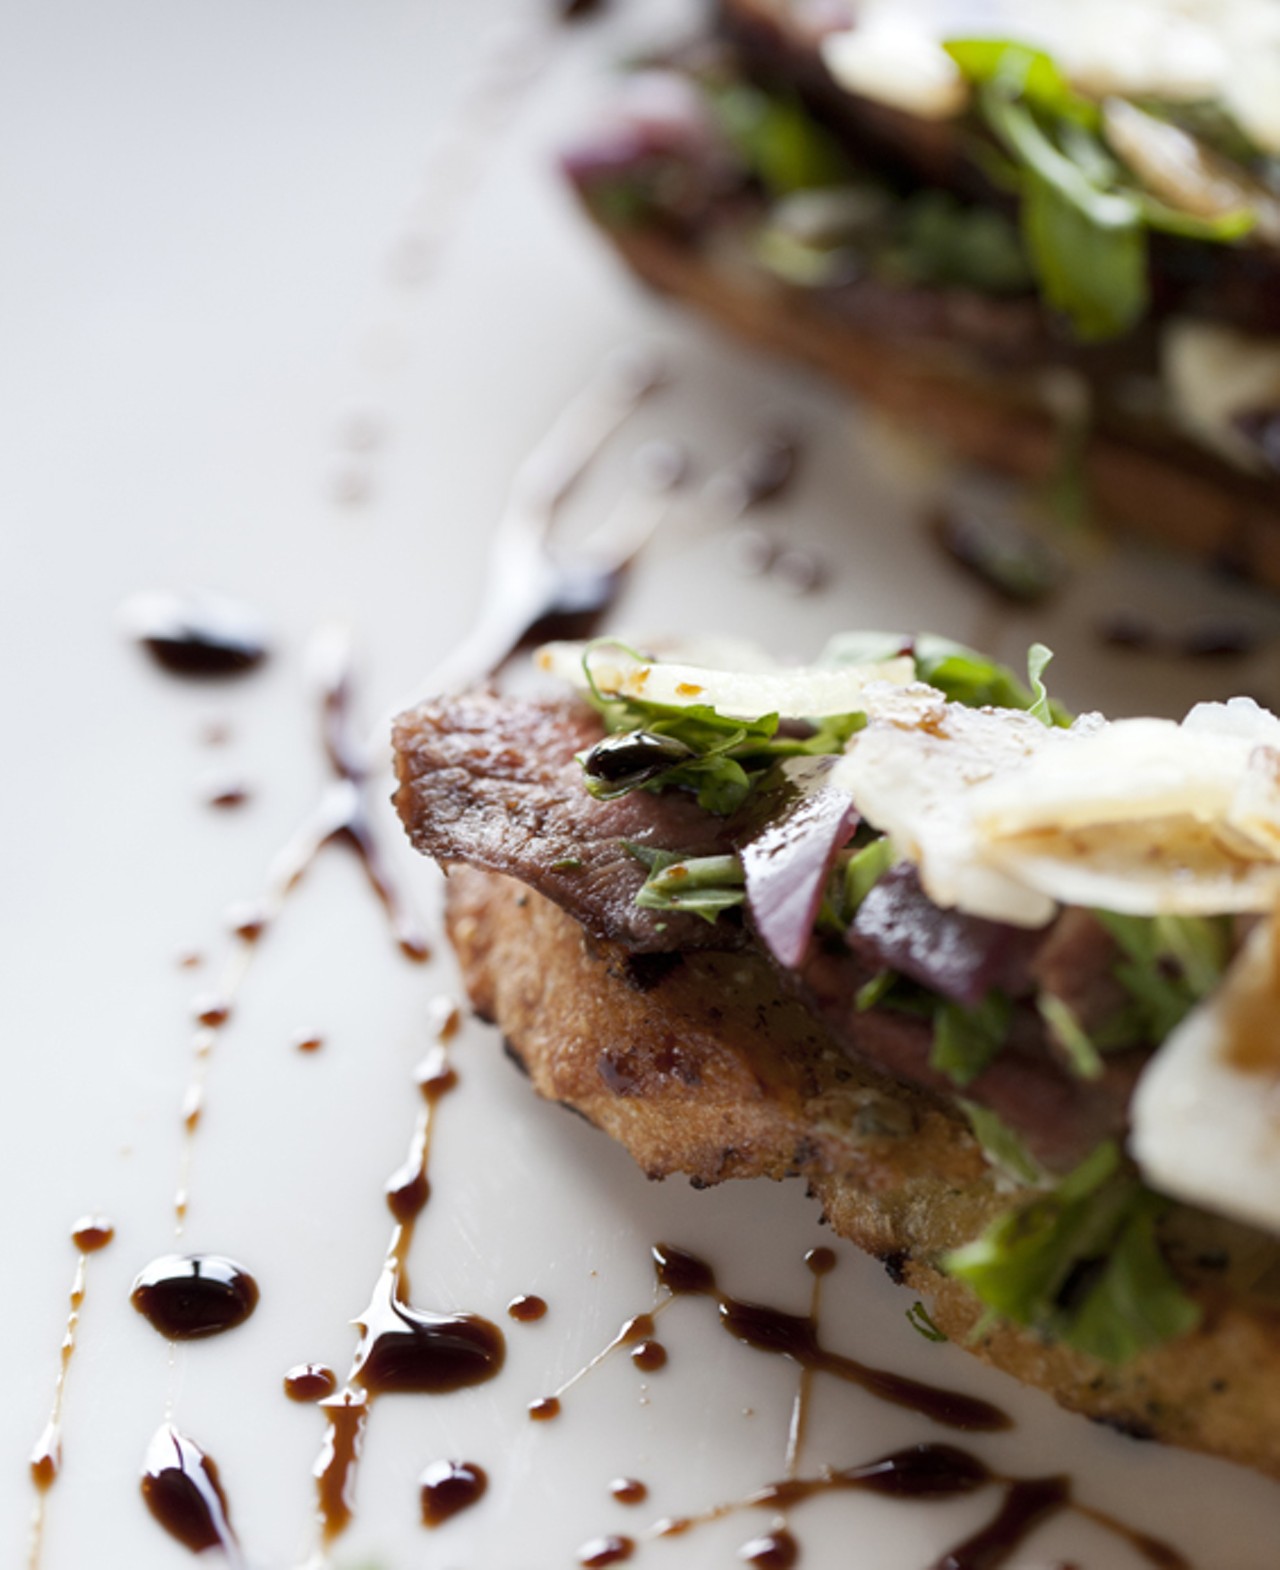 Steak Bruschetta - rosemary flank steak, blue cheese, arugula, chianti braised shallots, grilled baguette, shaved parmesan and balsamic reduction.